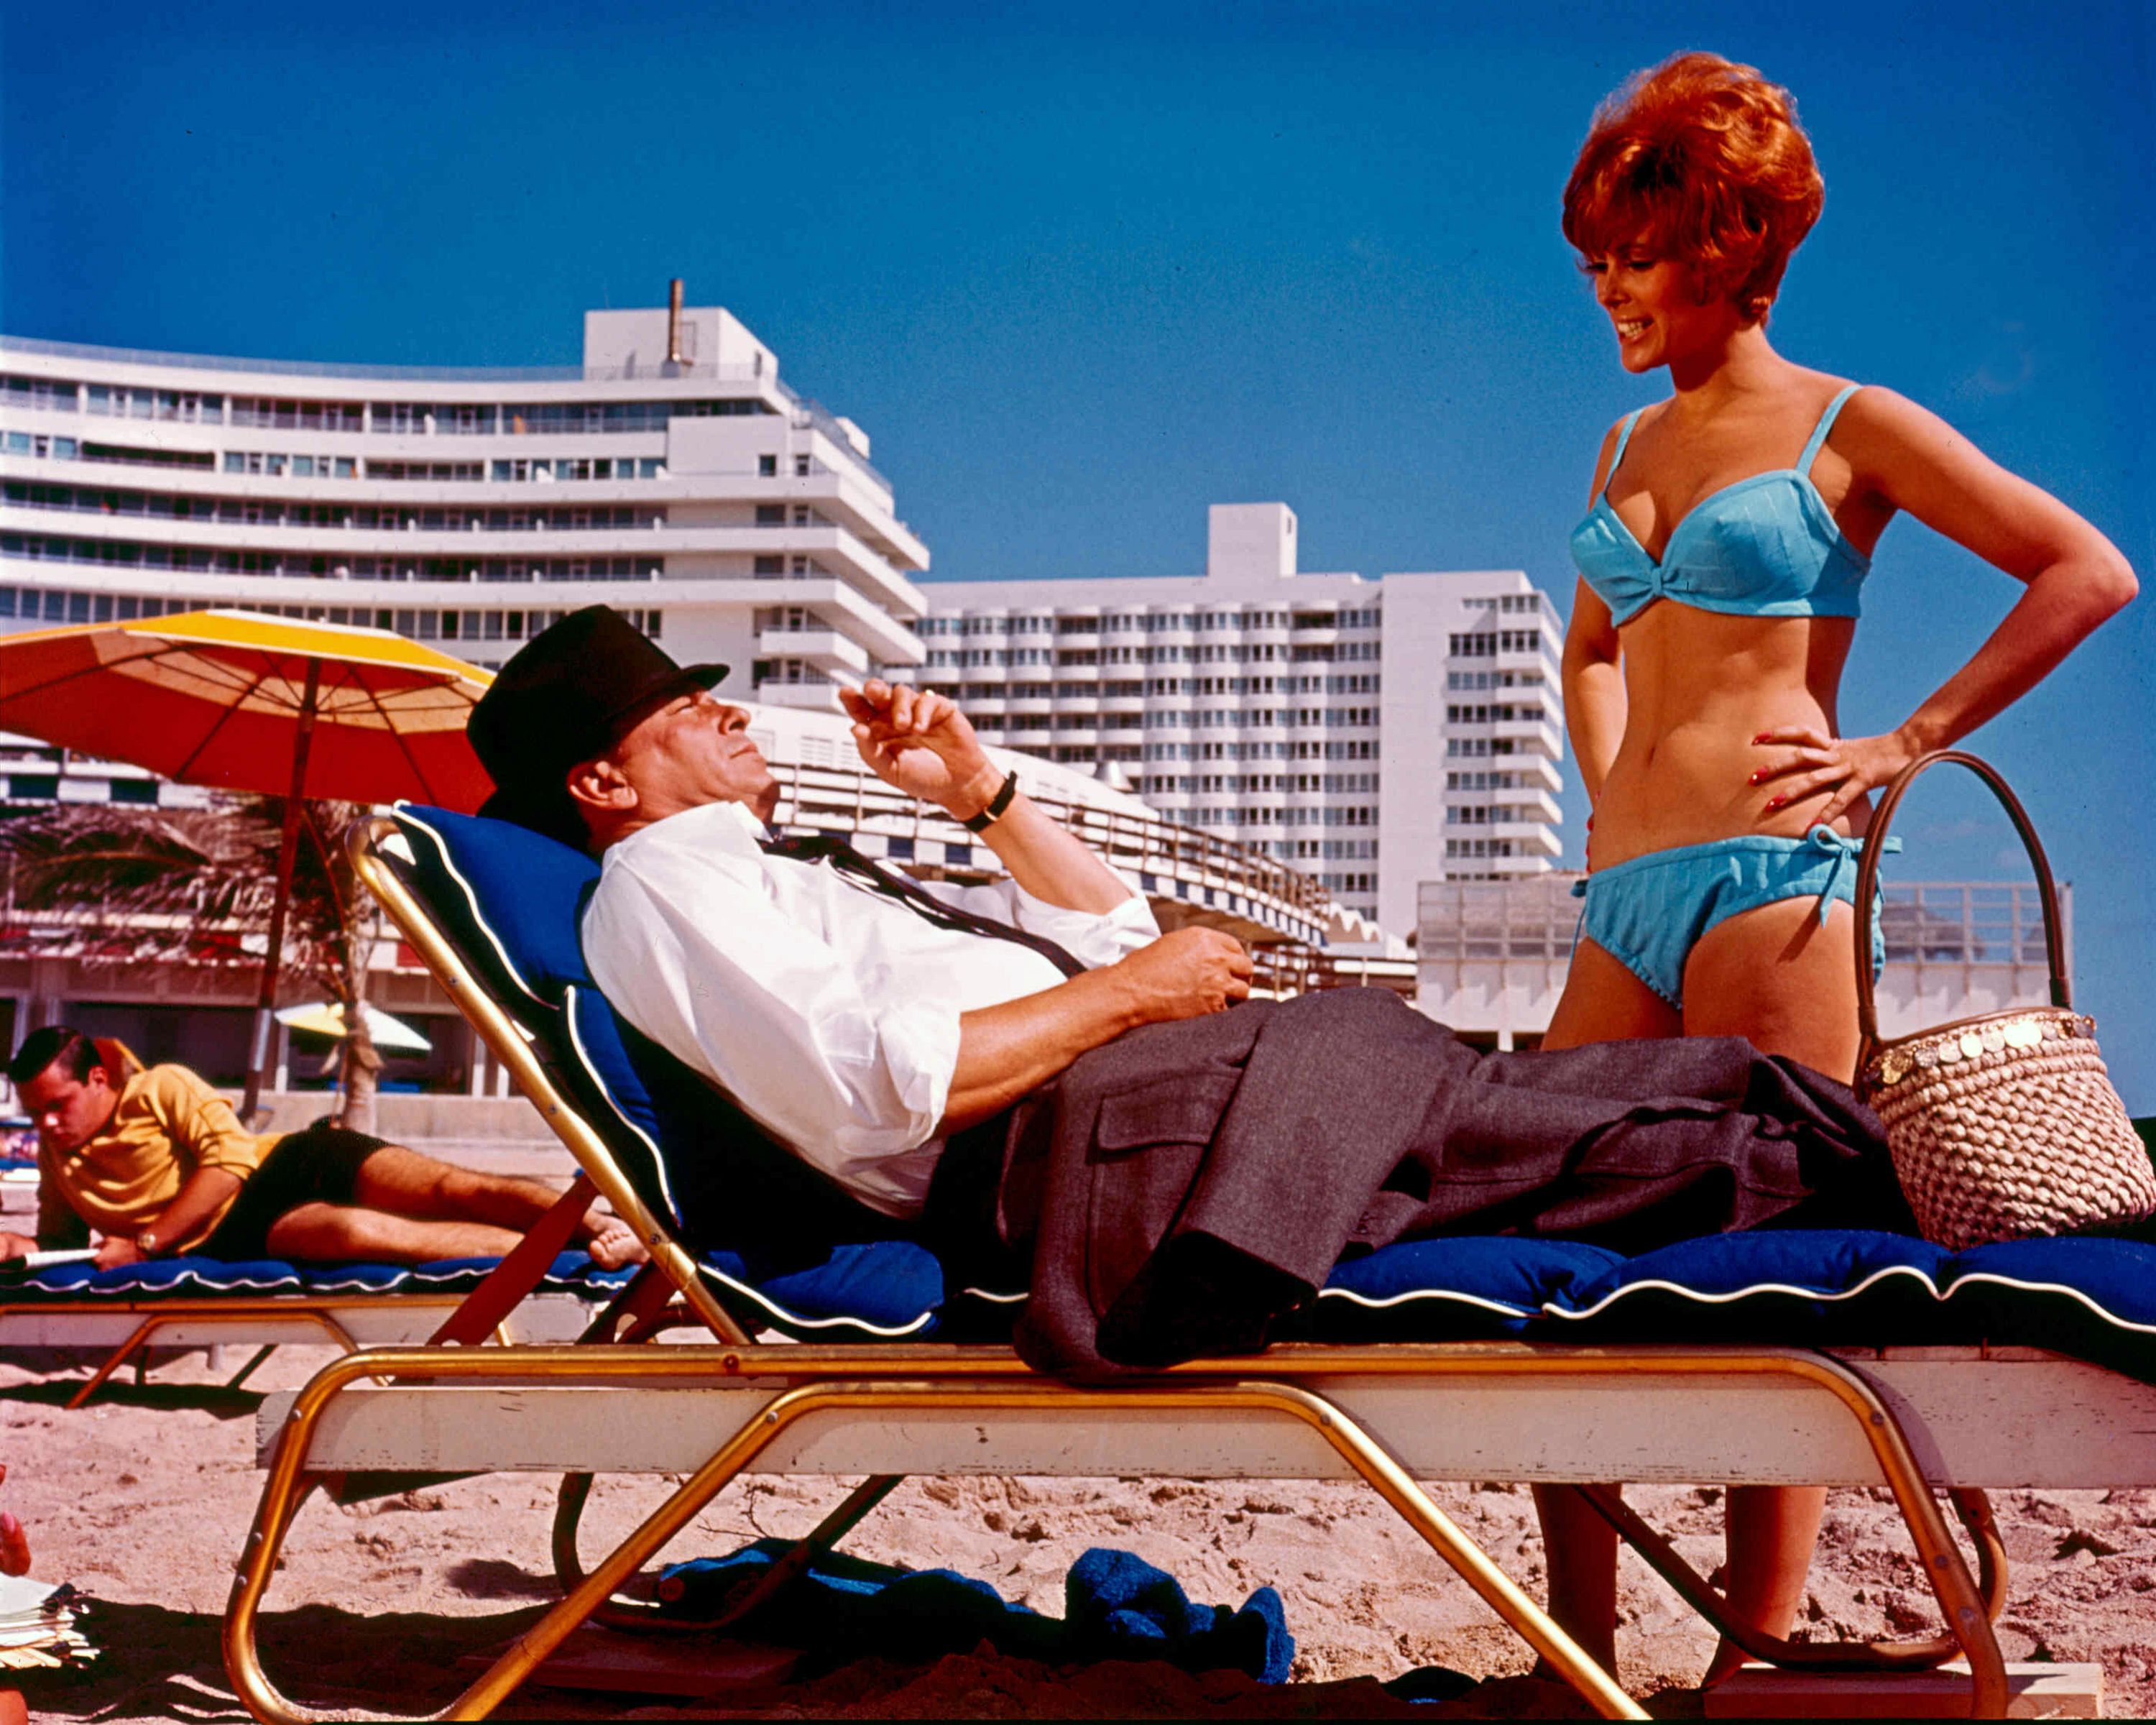 Candid Beach Nudes In Spain - Frank Sinatra Has a Cold - Gay Talese - Best Profile of Sinatra